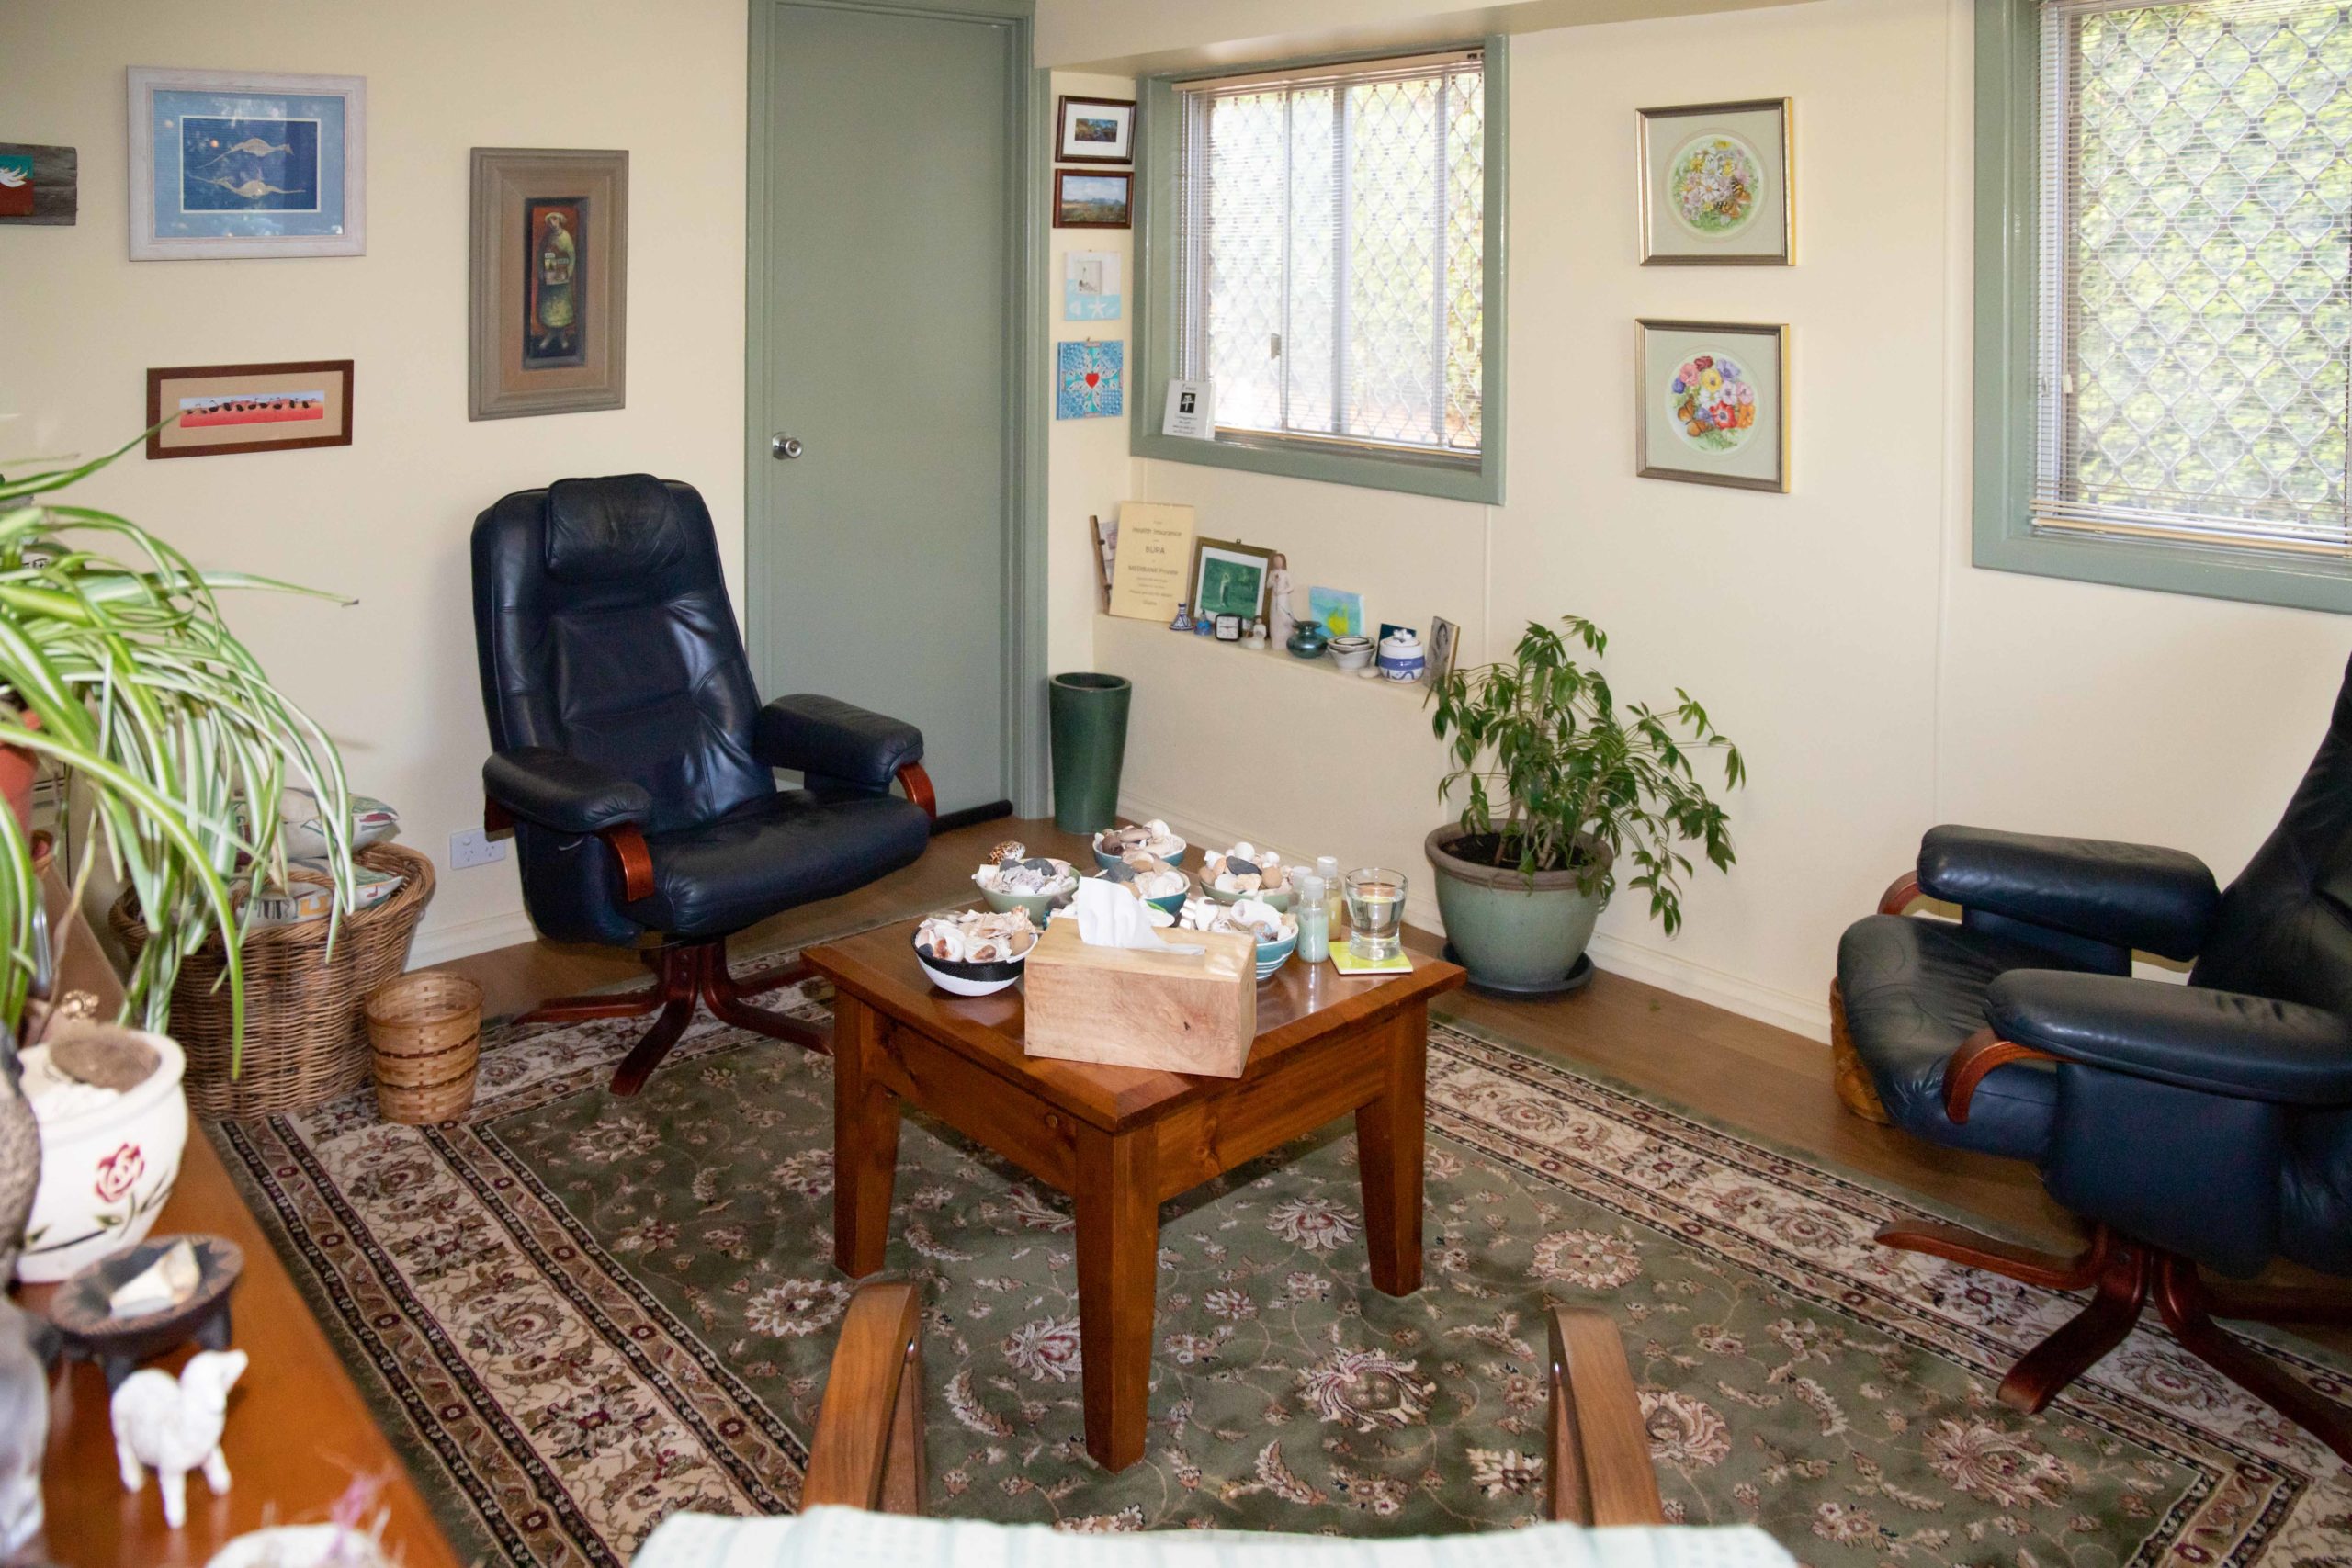 Photo of the treatment room